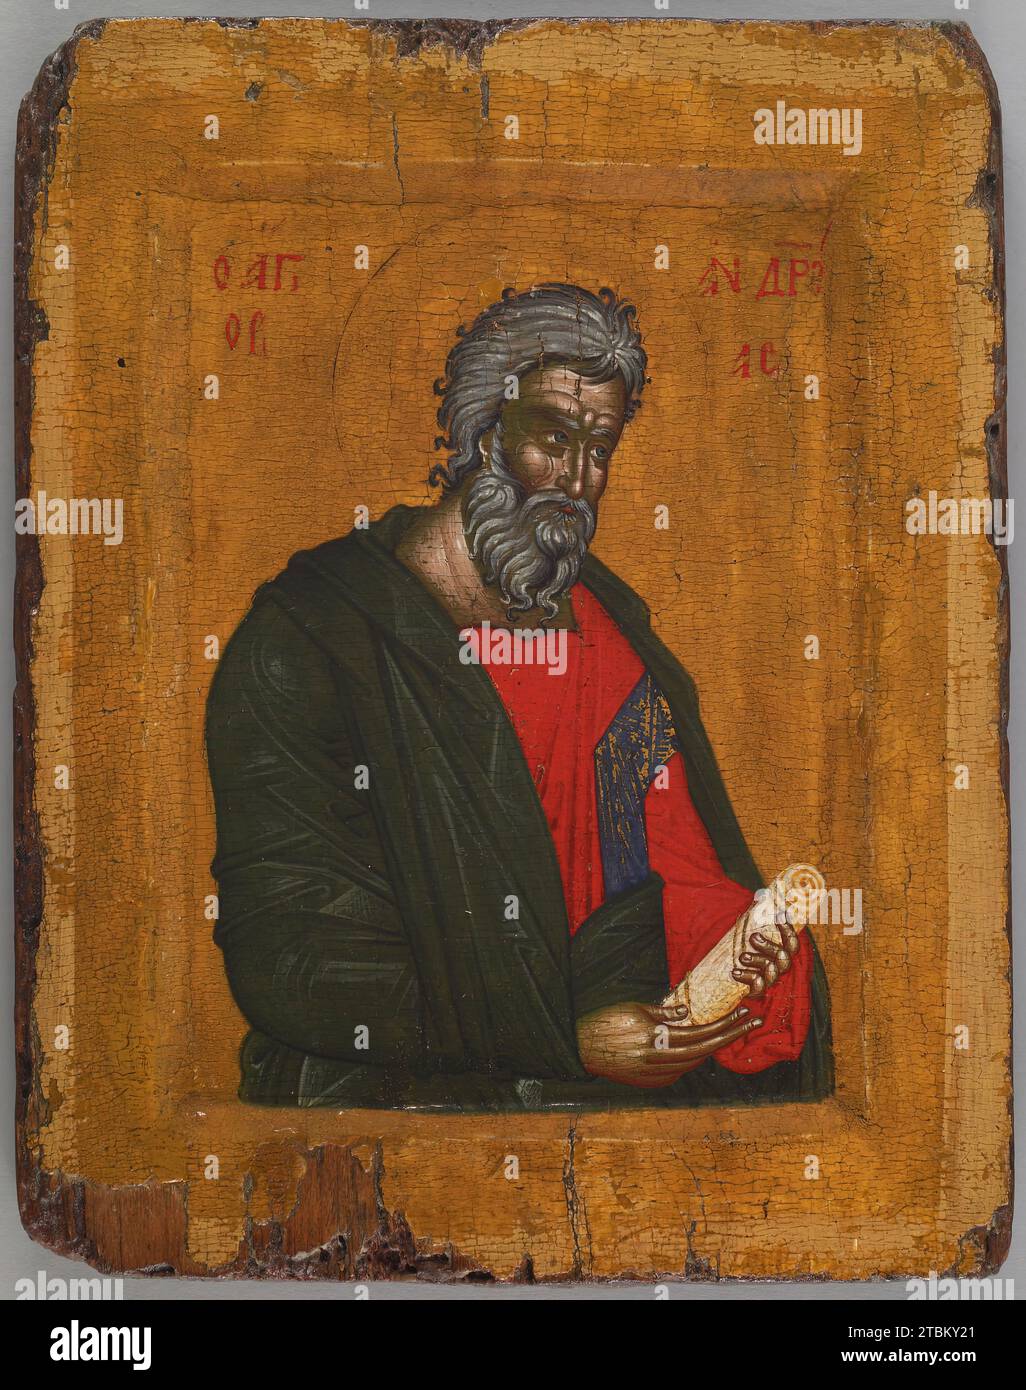 Saint Andrew, 14th century. Saint Andrew, holding a scroll, looks intently to his left, indicating that the panel once may have formed part of a group of icons with Christ at the center. It may have been placed on the upper tier of an &quot;iconostasis,&quot; the screen dividing the sanctuary from the nave in an Orthodox Church. The color scheme of the icon is unusual in its use of extremely bright colors for the saint's robe and a mustard yellow - instead of gold - for the background. Stock Photo